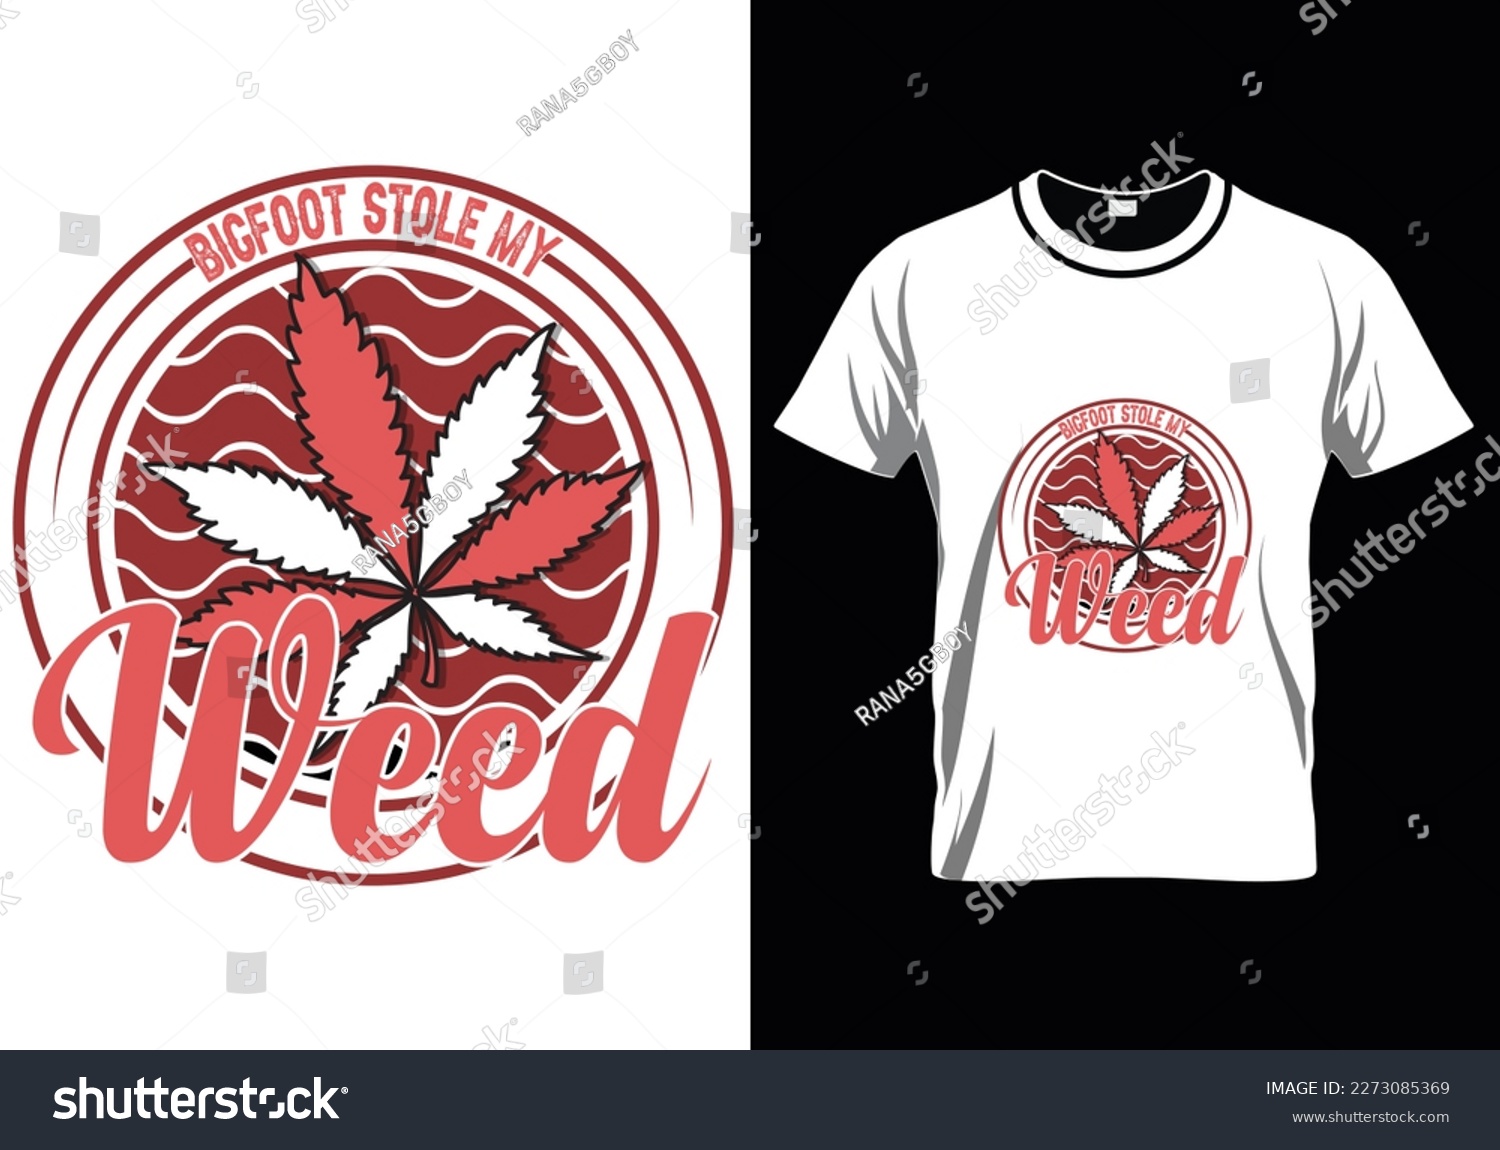 SVG of Bigfoot Stole My Weed T-Shirt Design svg